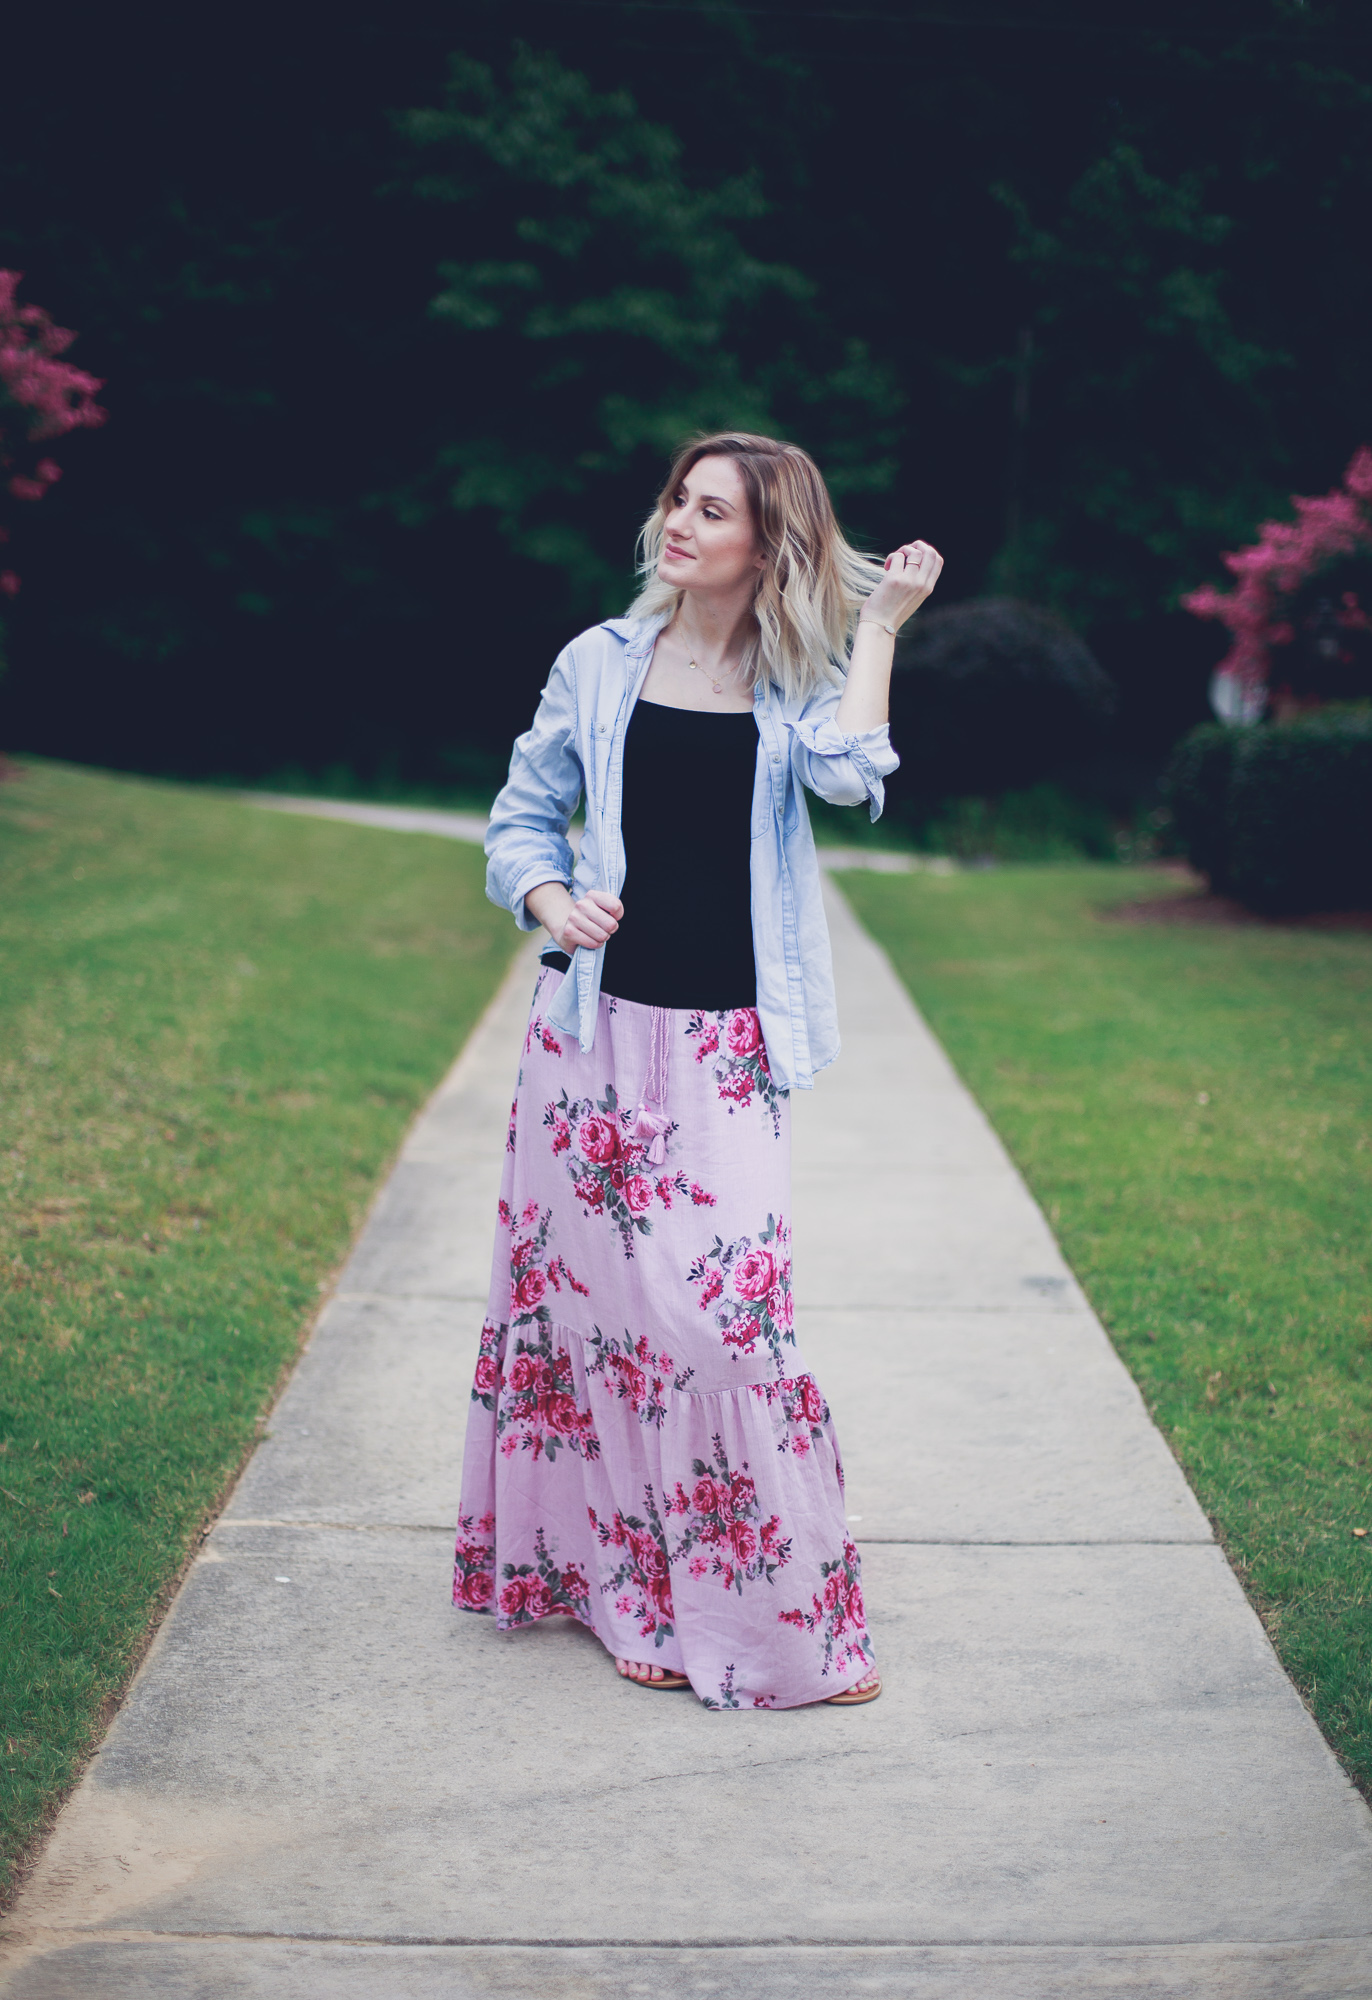 Lifestyle, fashion, and beauty blogger / vlogger Jessica Linn from Linn Style wearing a pink floral maxi skirt from Ross a simple black tank and unbuttoned chambray with Tory Burch Sandals. Maternity Fashion Maternity Style